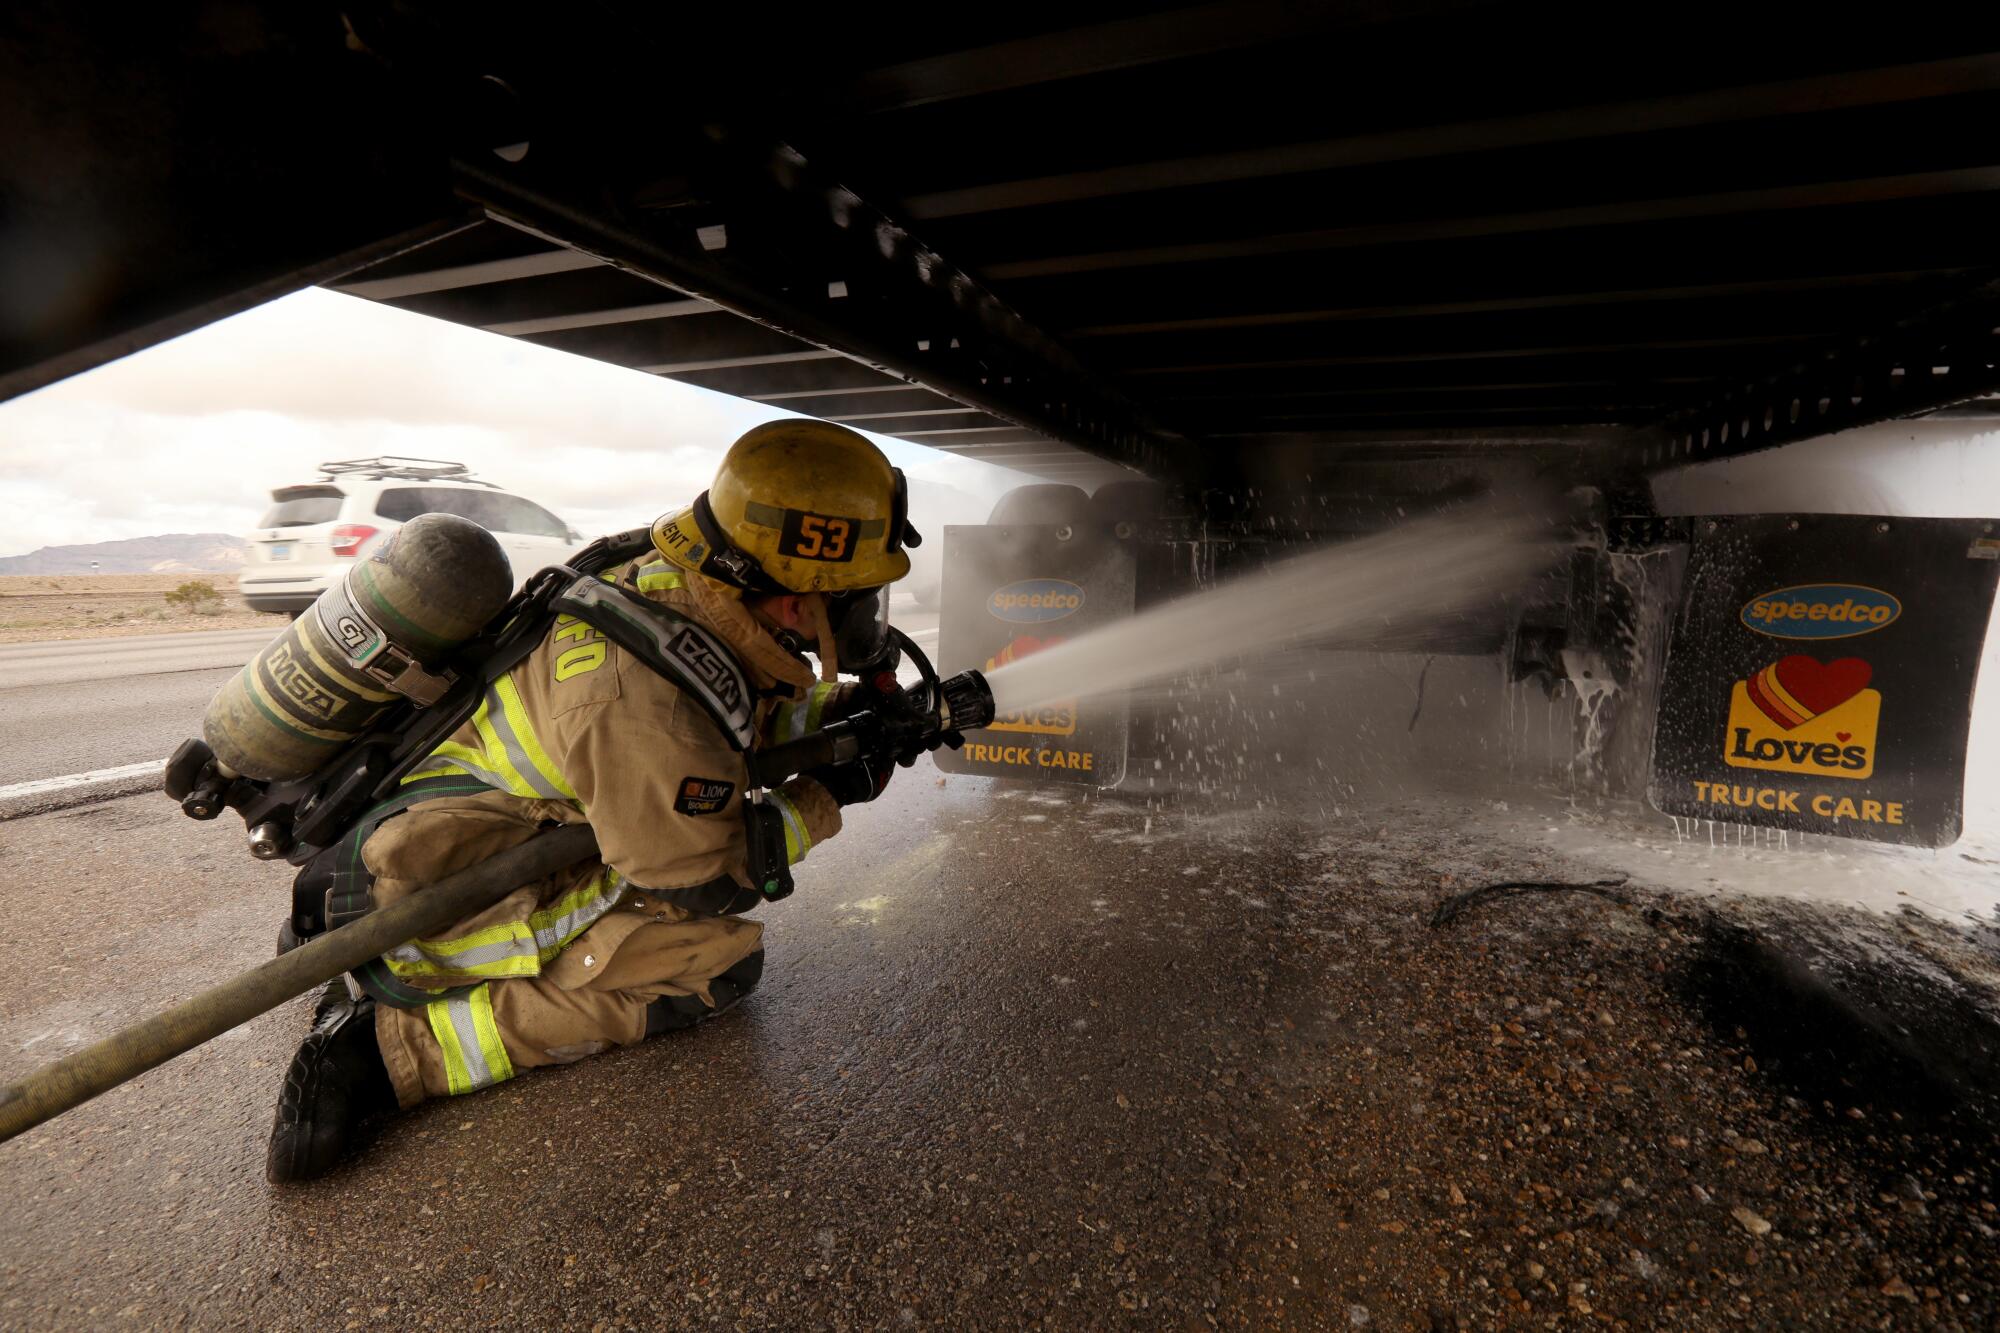 A firefighter cools off the overheated brakes on a truck to prevent it from catching fire just south of Primm, Nevada.